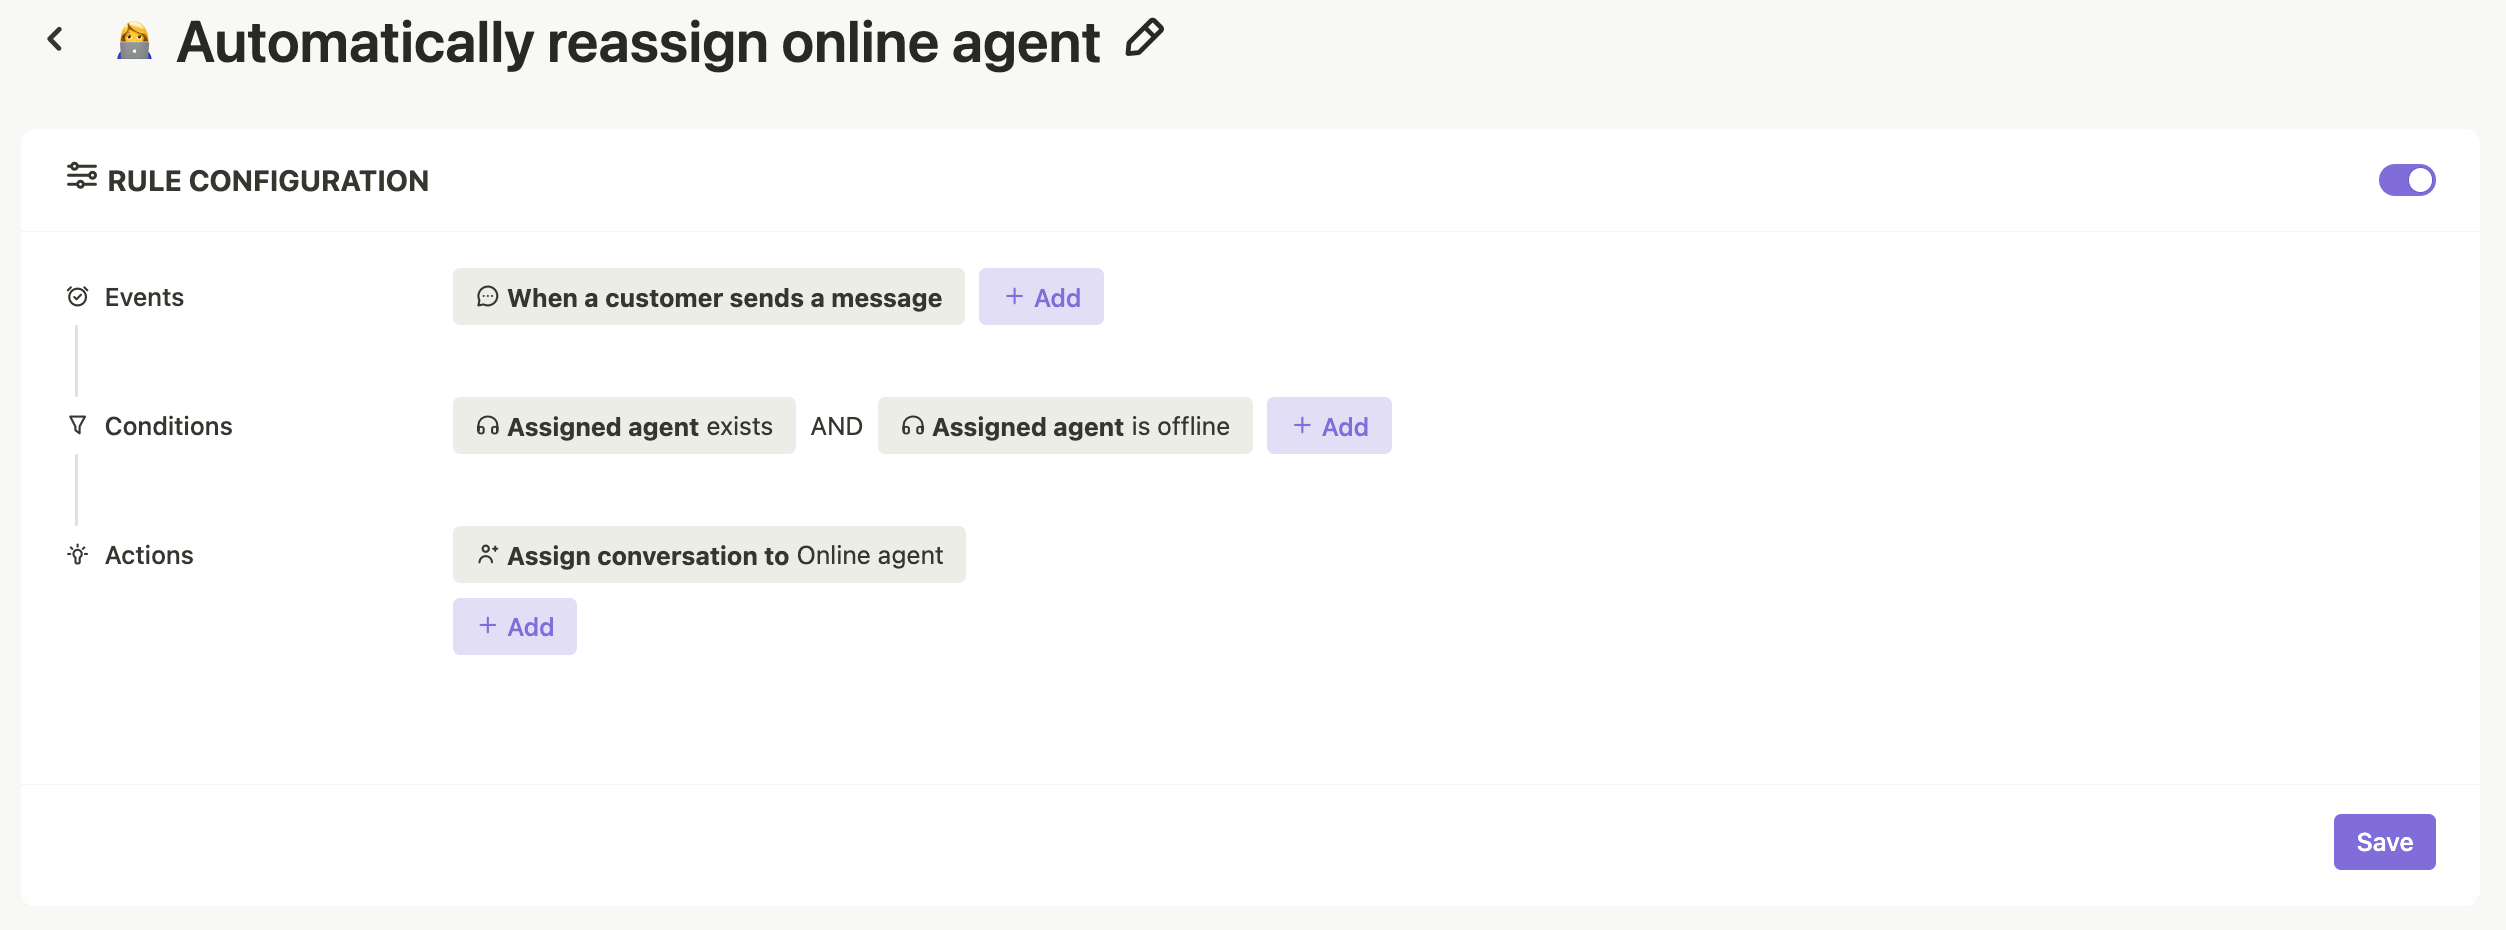 This image illustrates the process of automatically reassigning online agents!